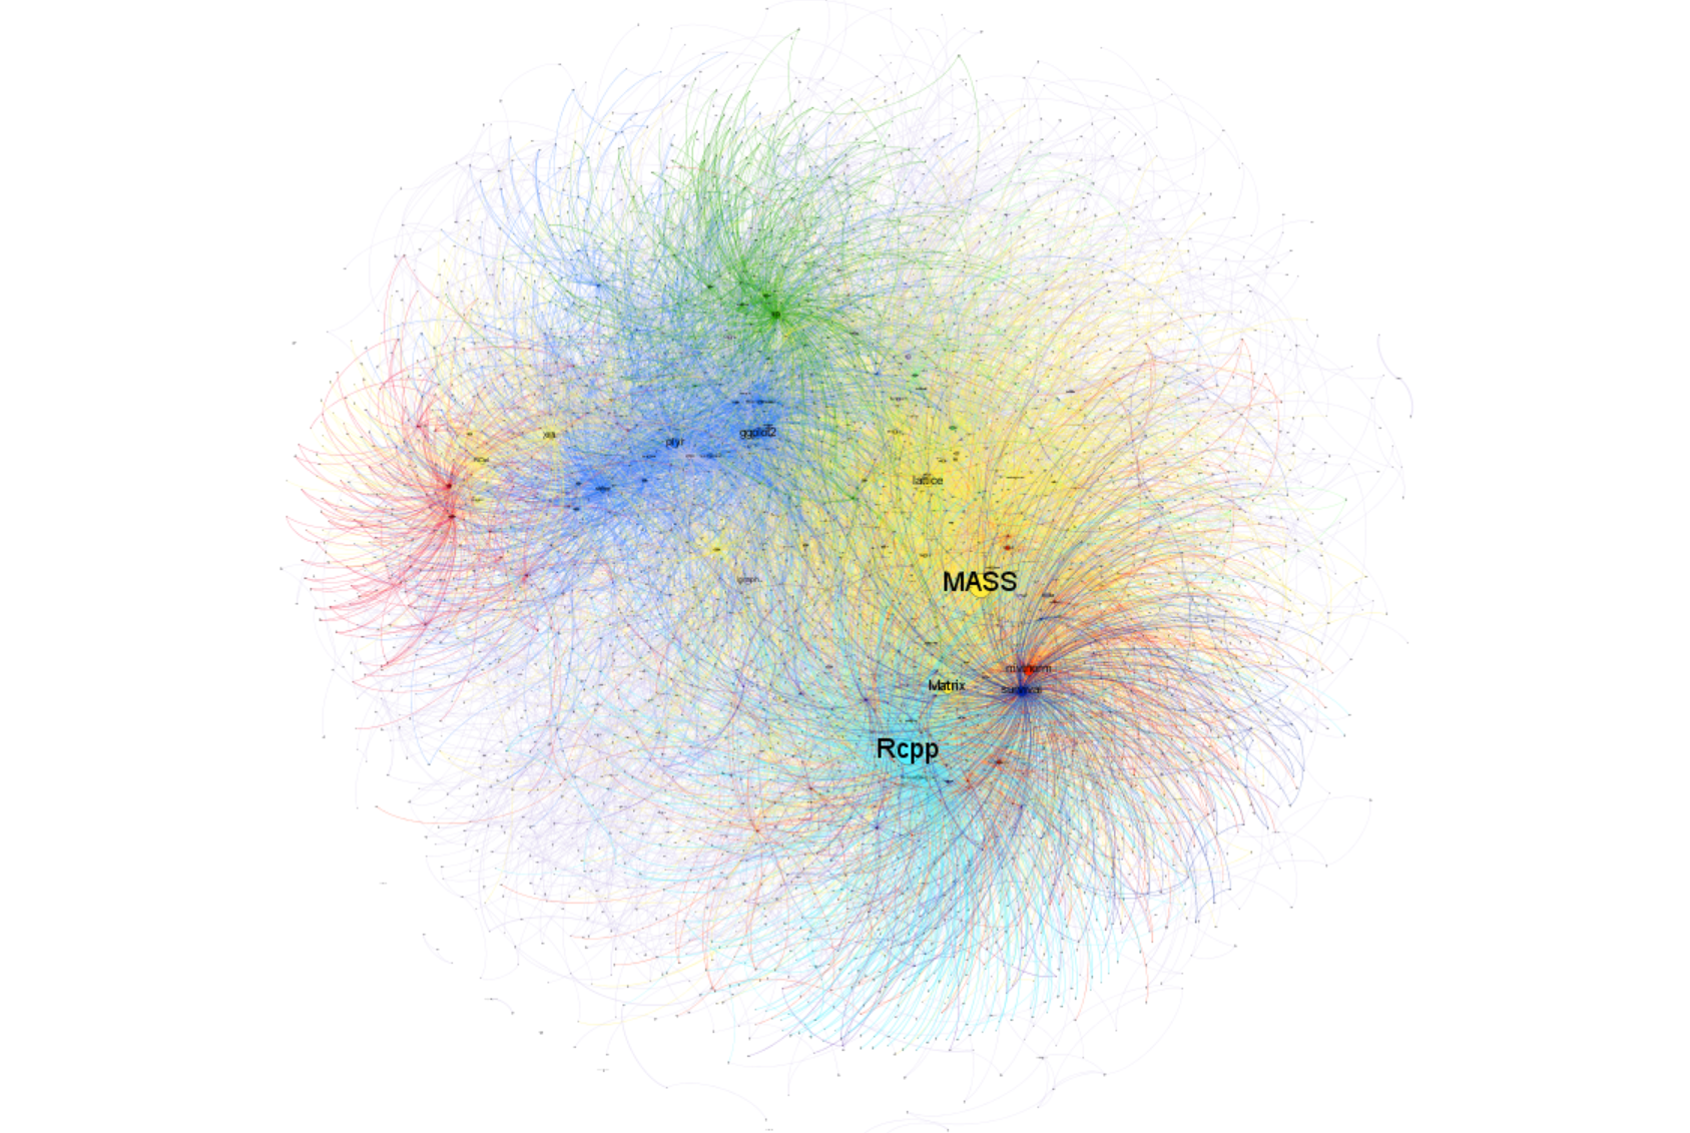 The network structure of CRAN; `sp` ecosystem shown in green^[blog.revolutionanalytics.com/2015/07/the-network-structure-of-cran.html]